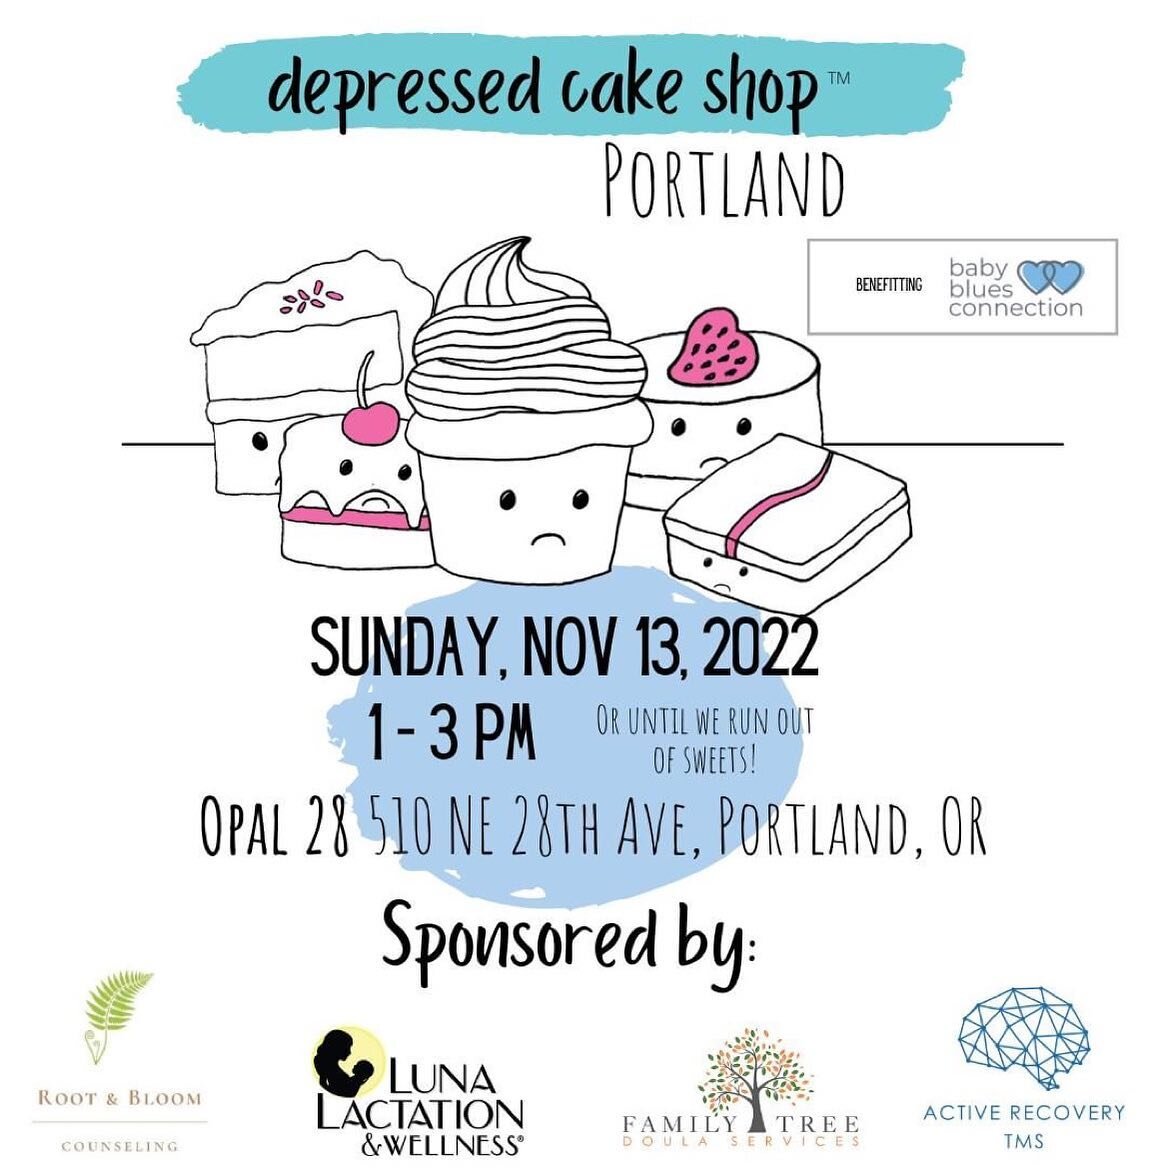 Repost from @depressedcakeshop_pdx
&bull;
Many thanks to our sponsors:
@activerecoverytms 
@familytreedoulaservices 
@lunalactation 
@root.bloom.pdx 
Their support helps cover costs associated with hosting these pop-ups. 

#mentalhealthmatters #batte